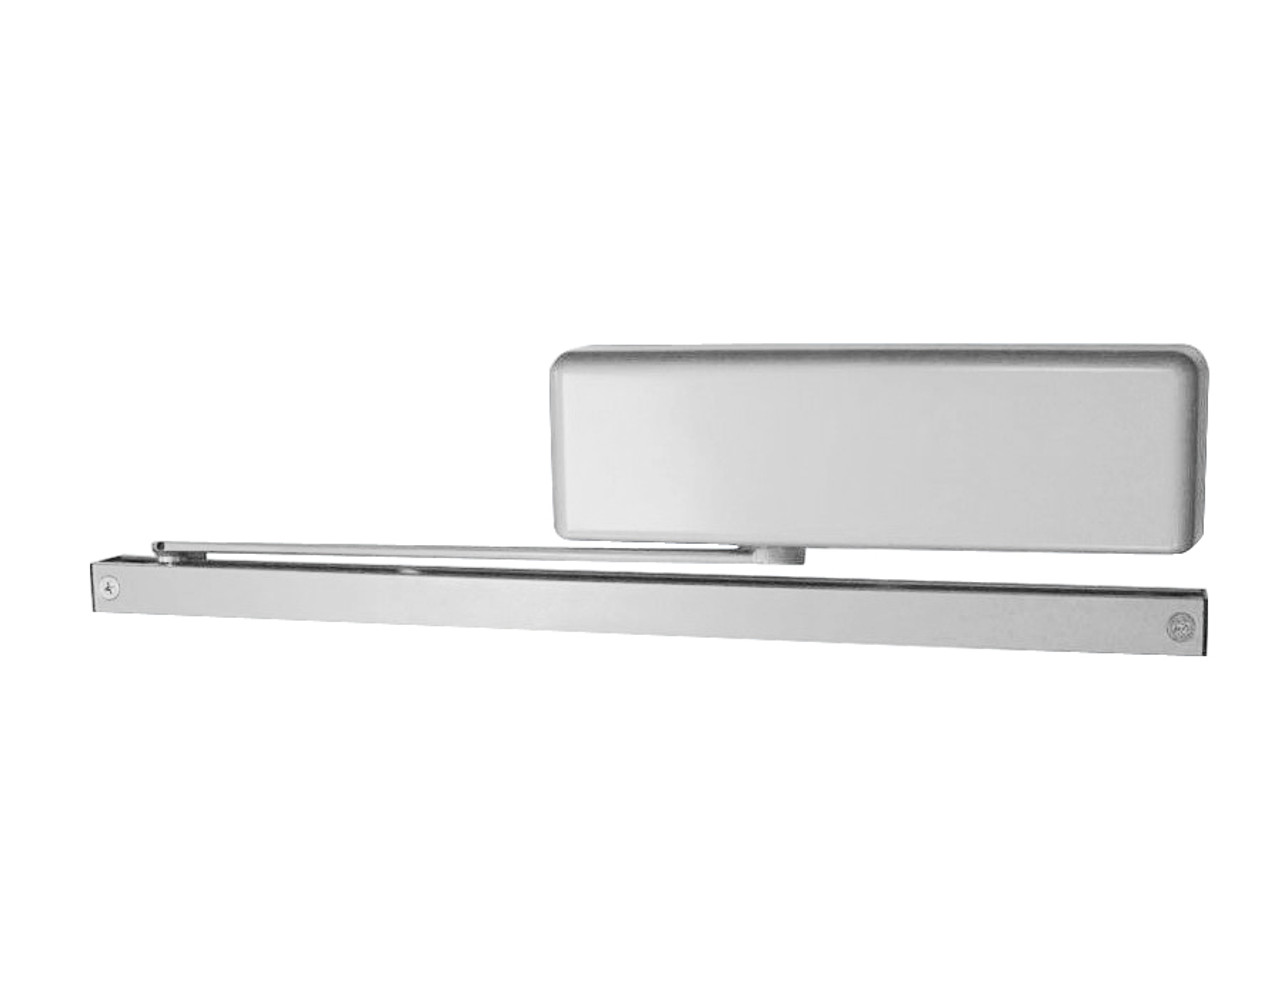 4021T-H-RH-US26 LCN Door Closer with Hold-Open Arm in Bright Chrome Finish